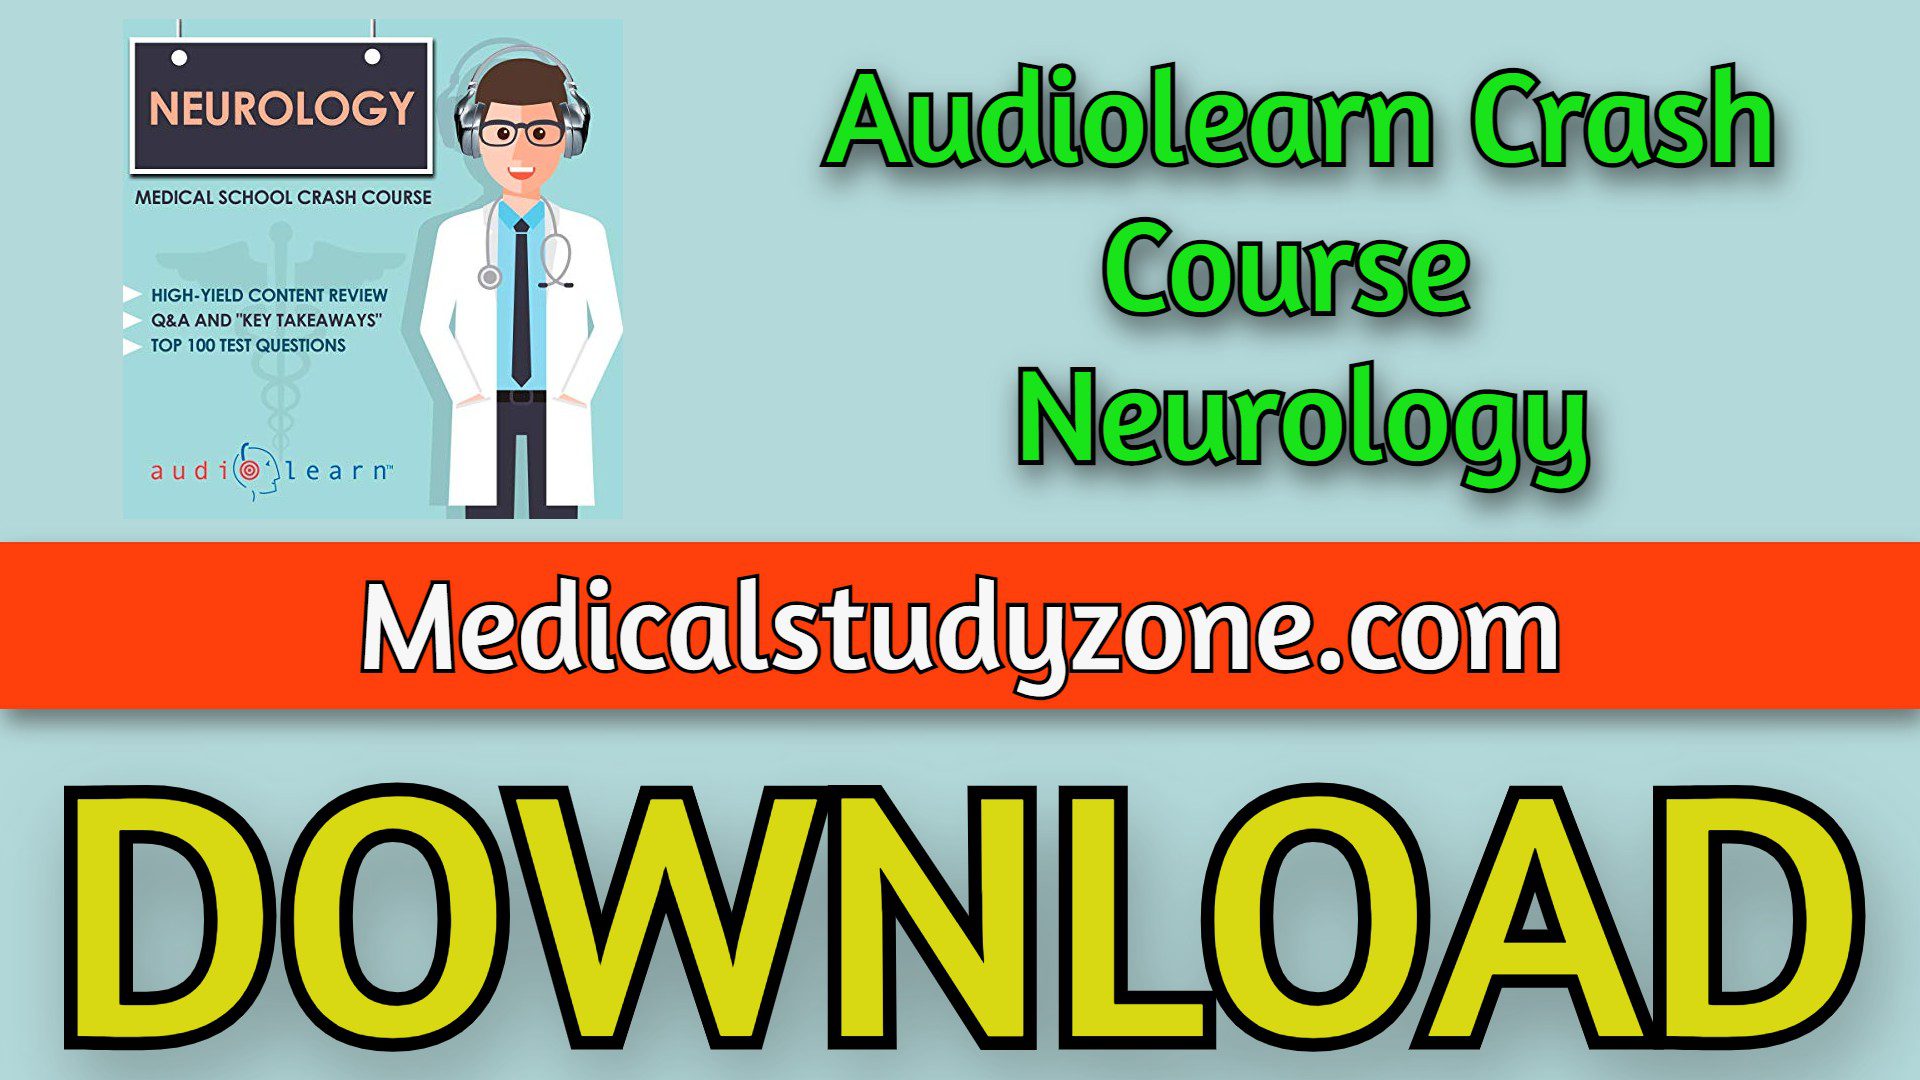 Audiolearn Crash Course Neurology 2021 Free Download